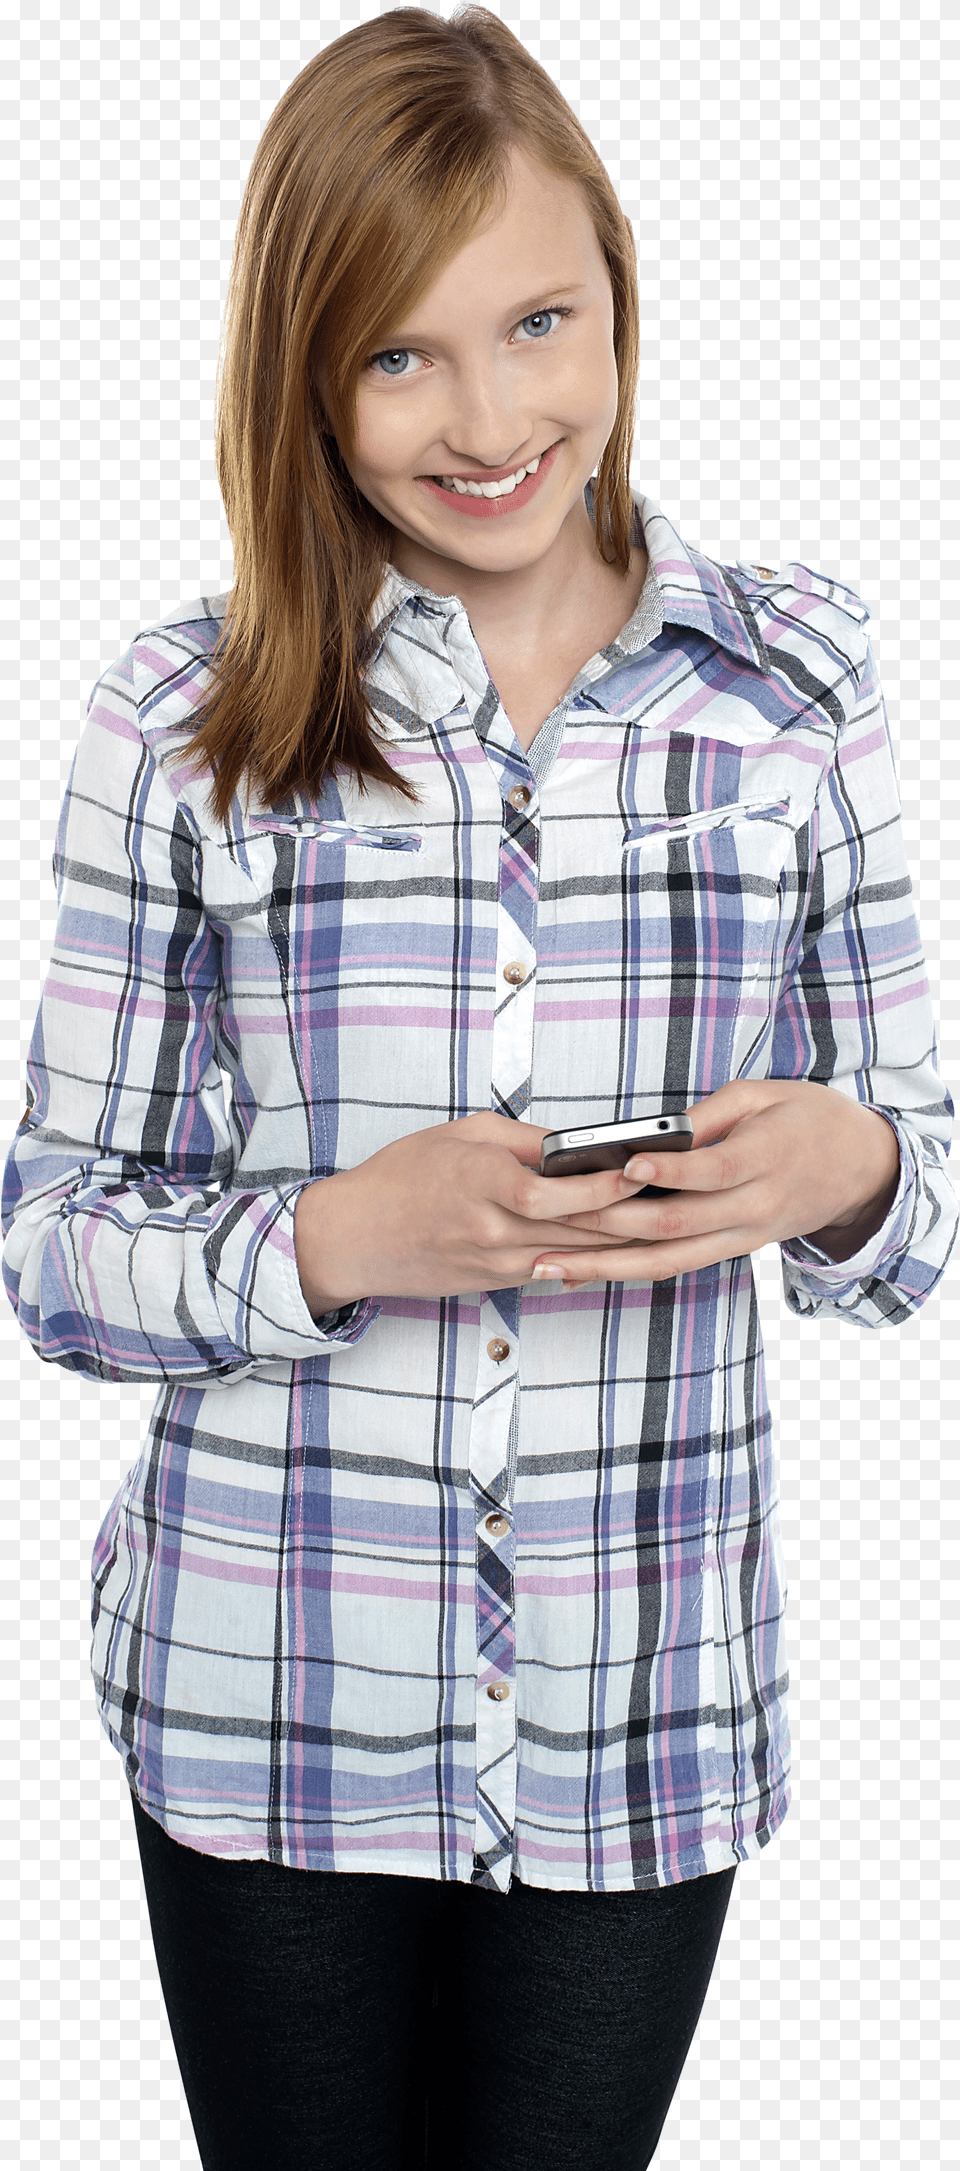 Teenage Girl Commercial Use Images Portable Network Graphics Png Image